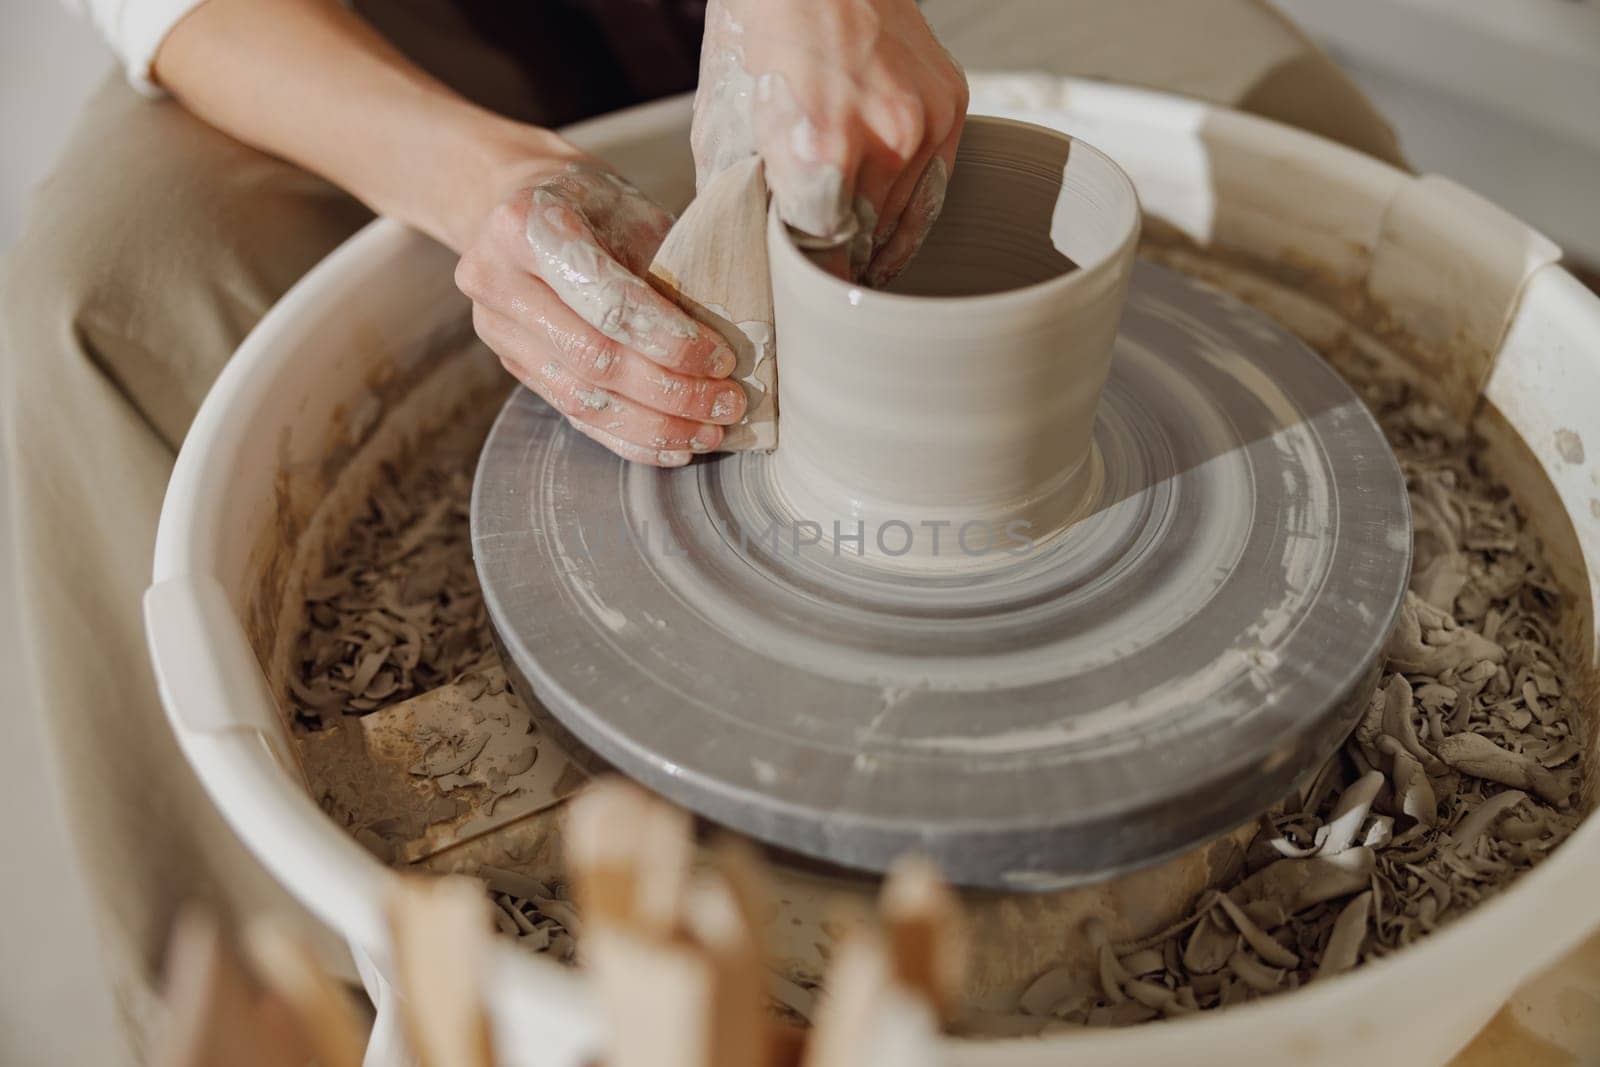 Female potter in apron making shape of clay vase on spinning pottery tool in ceramic workshop